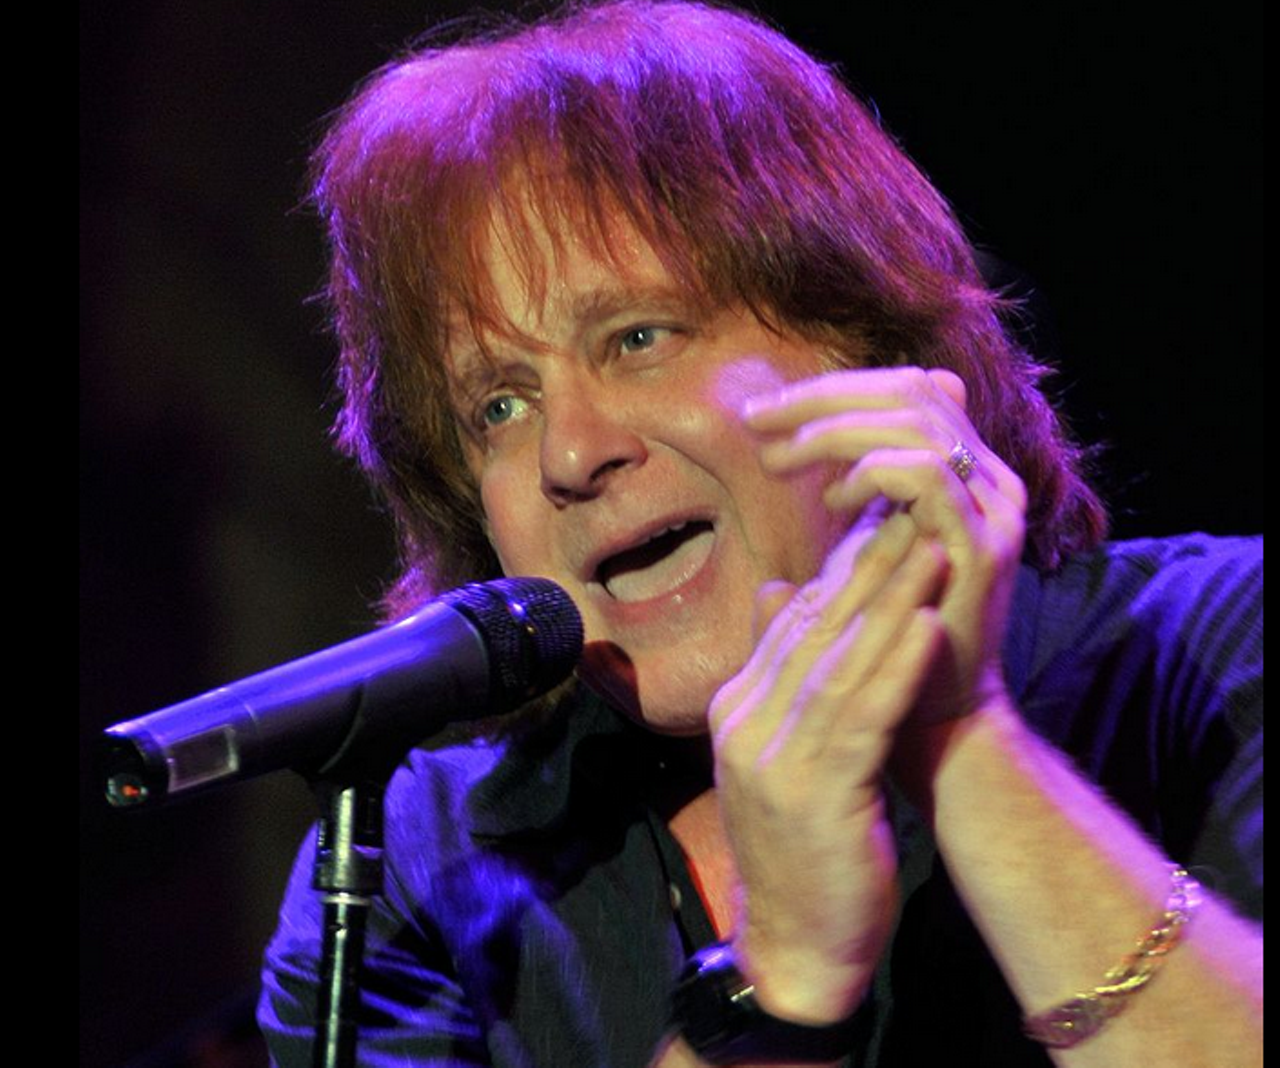 Gravelly voiced singer Eddie Money was a bit of a late bloomer. He started performing in the late ’60s but didn’t sign a record deal until 1977. His self-titled debut became a huge hit and yielded singles like “Two Tickets to Paradise” and “Baby Hold On.” Money continued to deliver hits throughout the ’80s until struggles with addiction nearly derailed his career. More than 10 years ago, he joined a 12-step program, embraced sobriety and commenced regularly touring and recording again. In 2012, he released a single, “One More Soldier Coming Home,” that benefited the Fallen Heroes Fund. Expect to hear it alongside hits such as “Take Me Home Tonight” and “Shakin’” at tonight’s show. Money loves Northeast Ohio so expect the guy to give it his all. See him live tonight at 7:30 p.m. at the Tangier. Tickets: $35-$75. (Jeff Niesel)